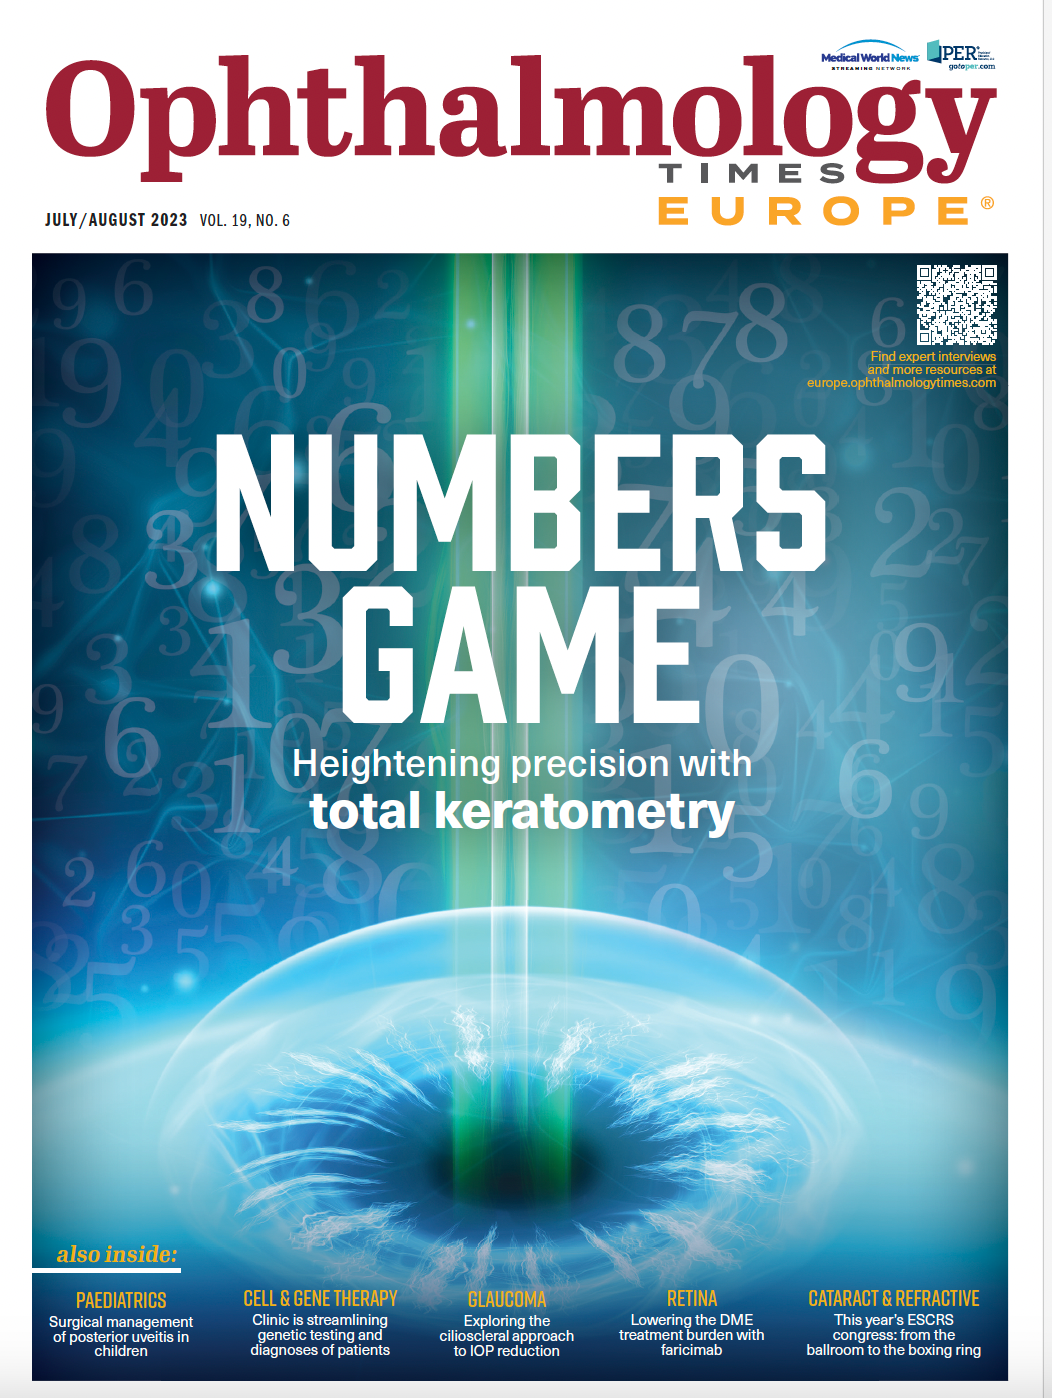 Cover of Ophthalmology Times Europe July/August 2023